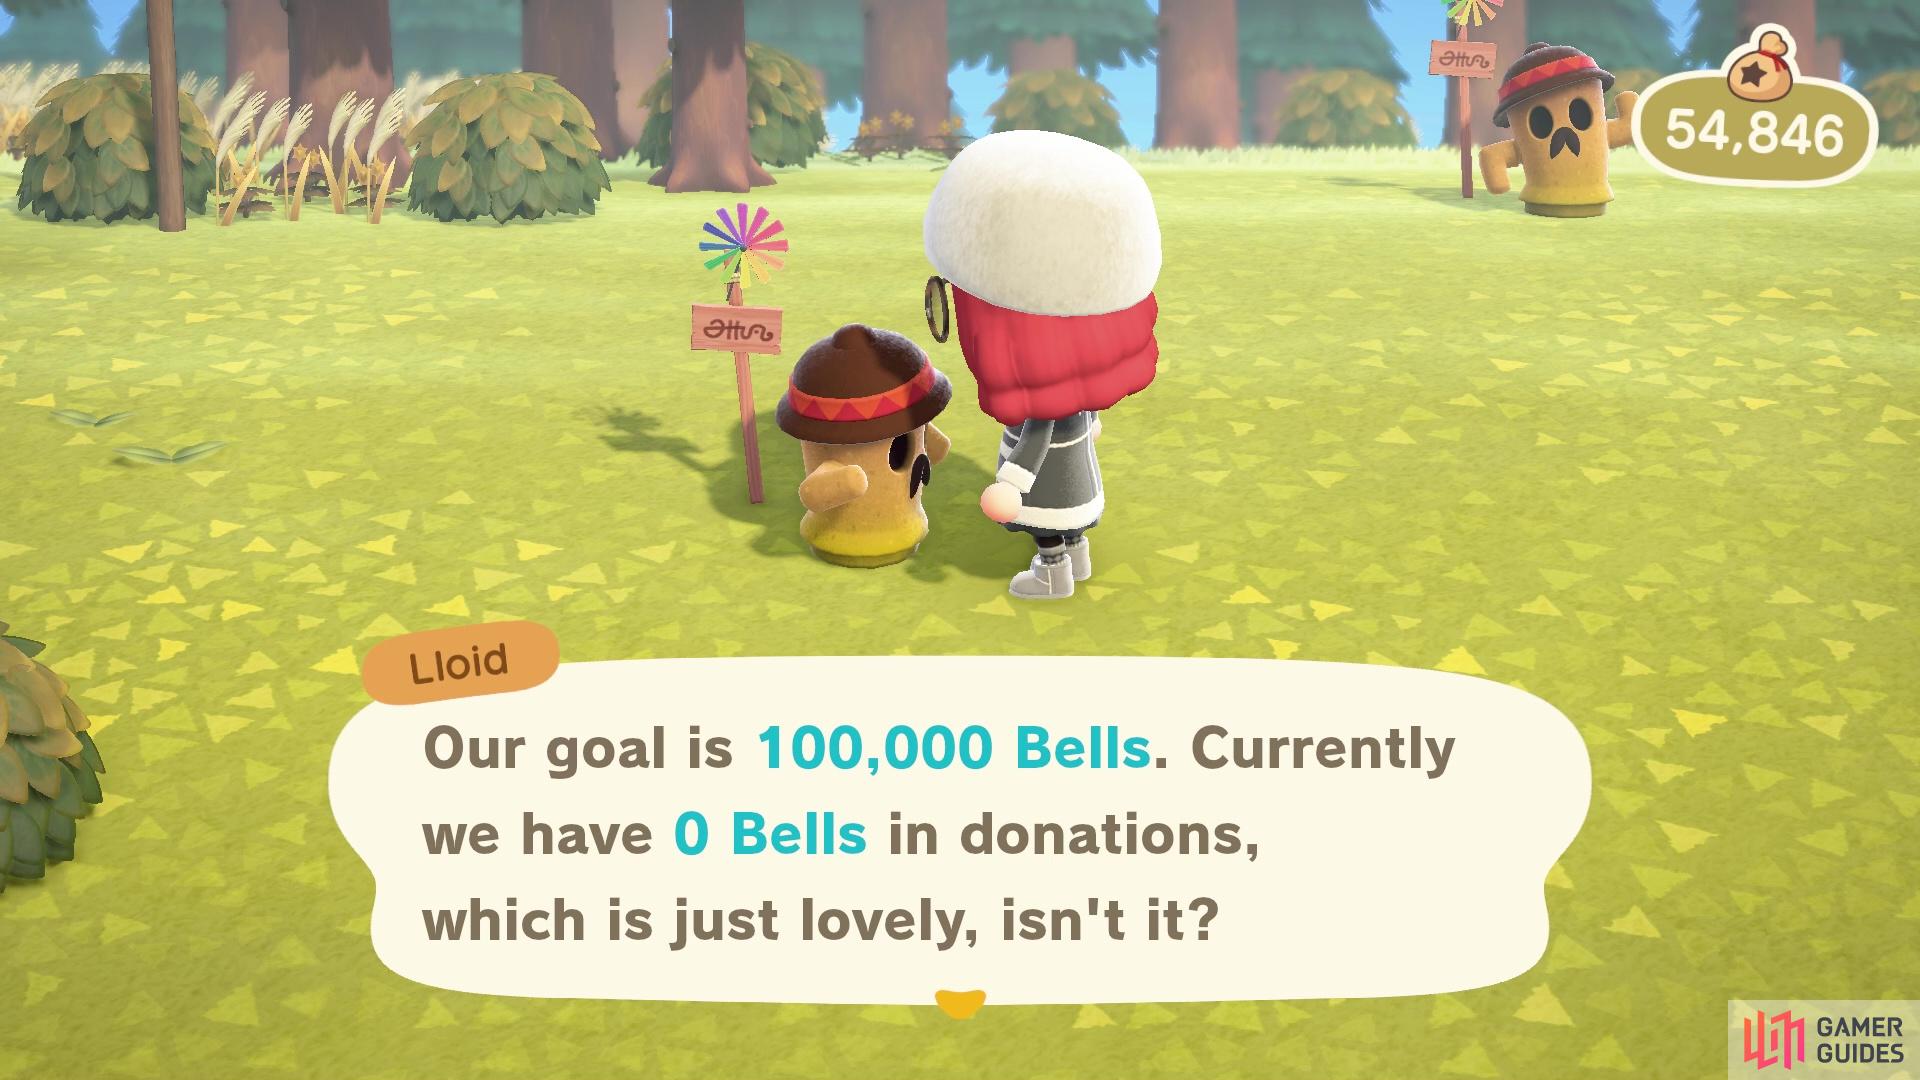 You'll need 100,000 Bells for Reese and Cyrus' shop!